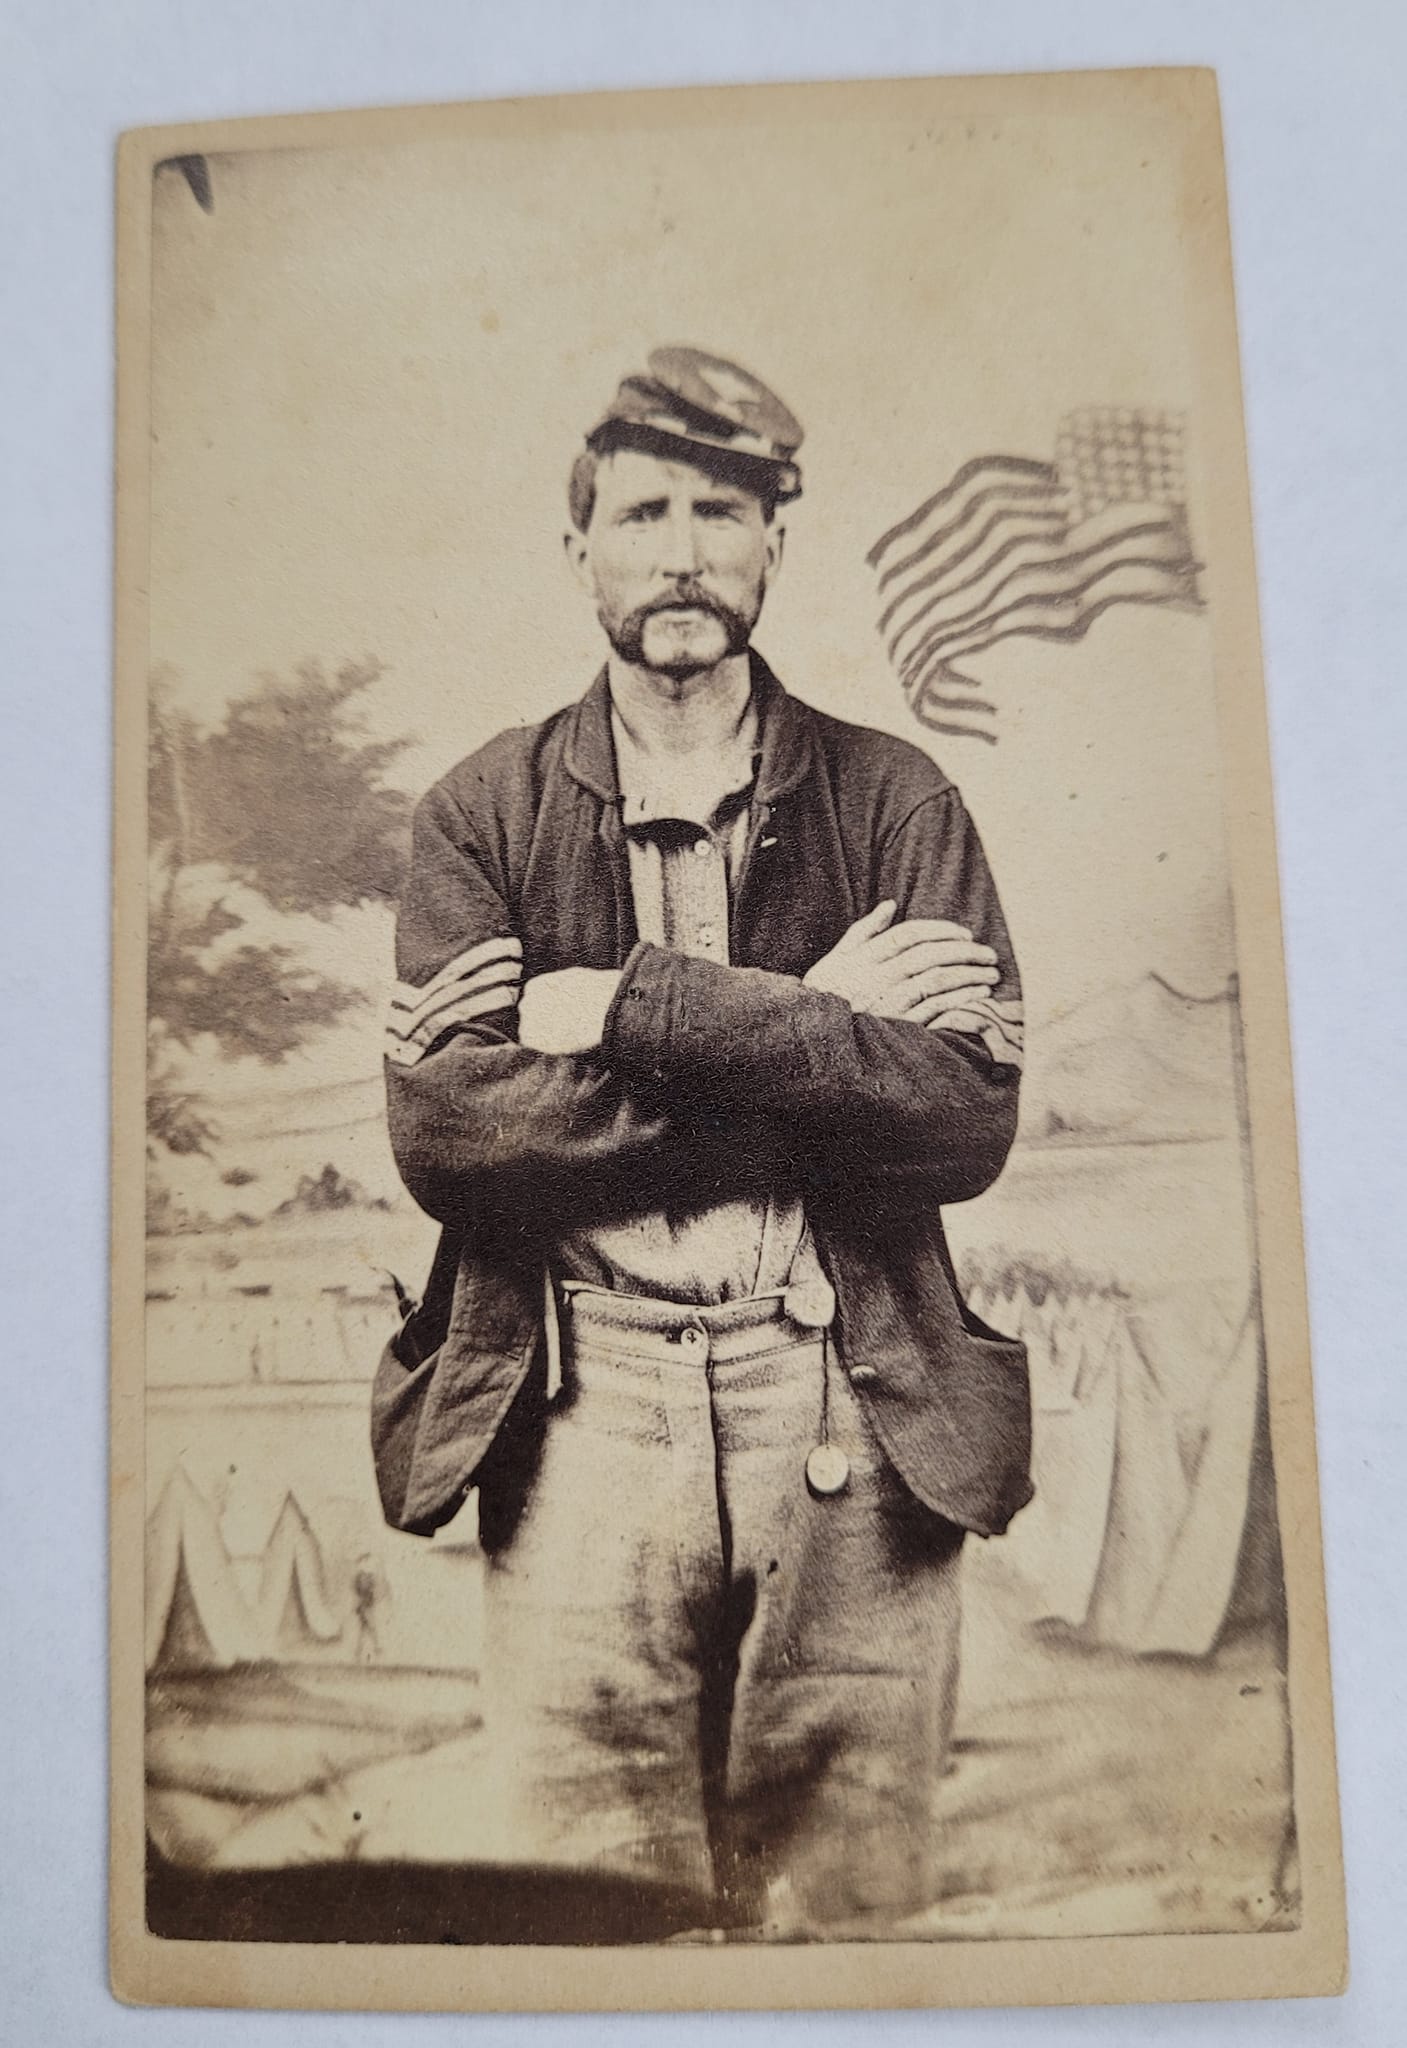 Another Massachusetts Sgt. in a Gale blouse.